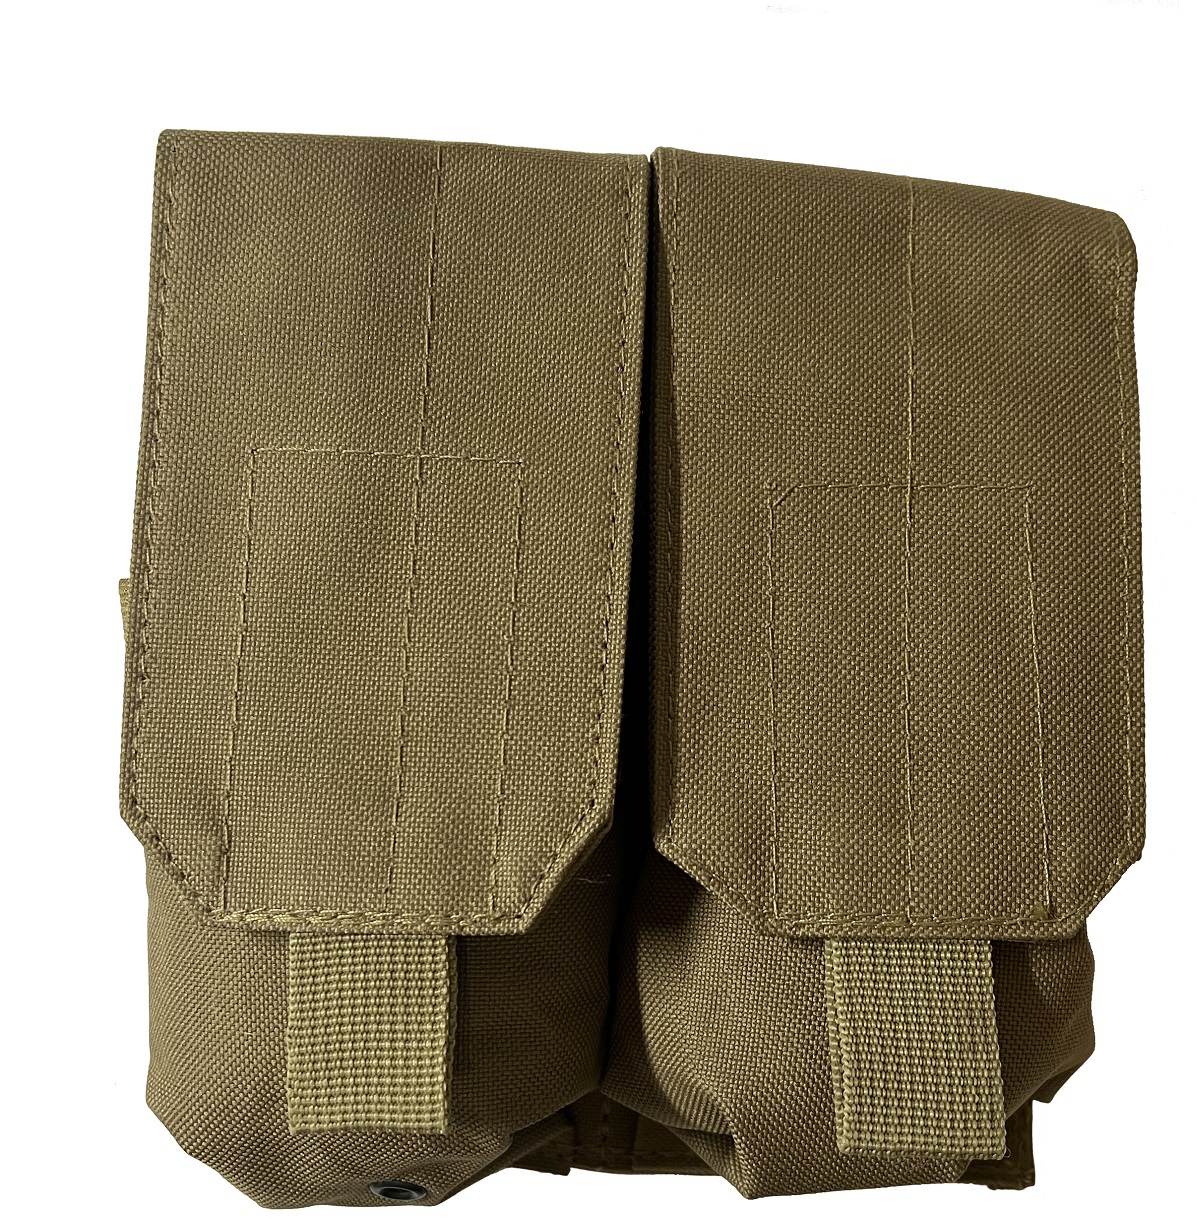 Tan magazine pouch "MOLLE" system